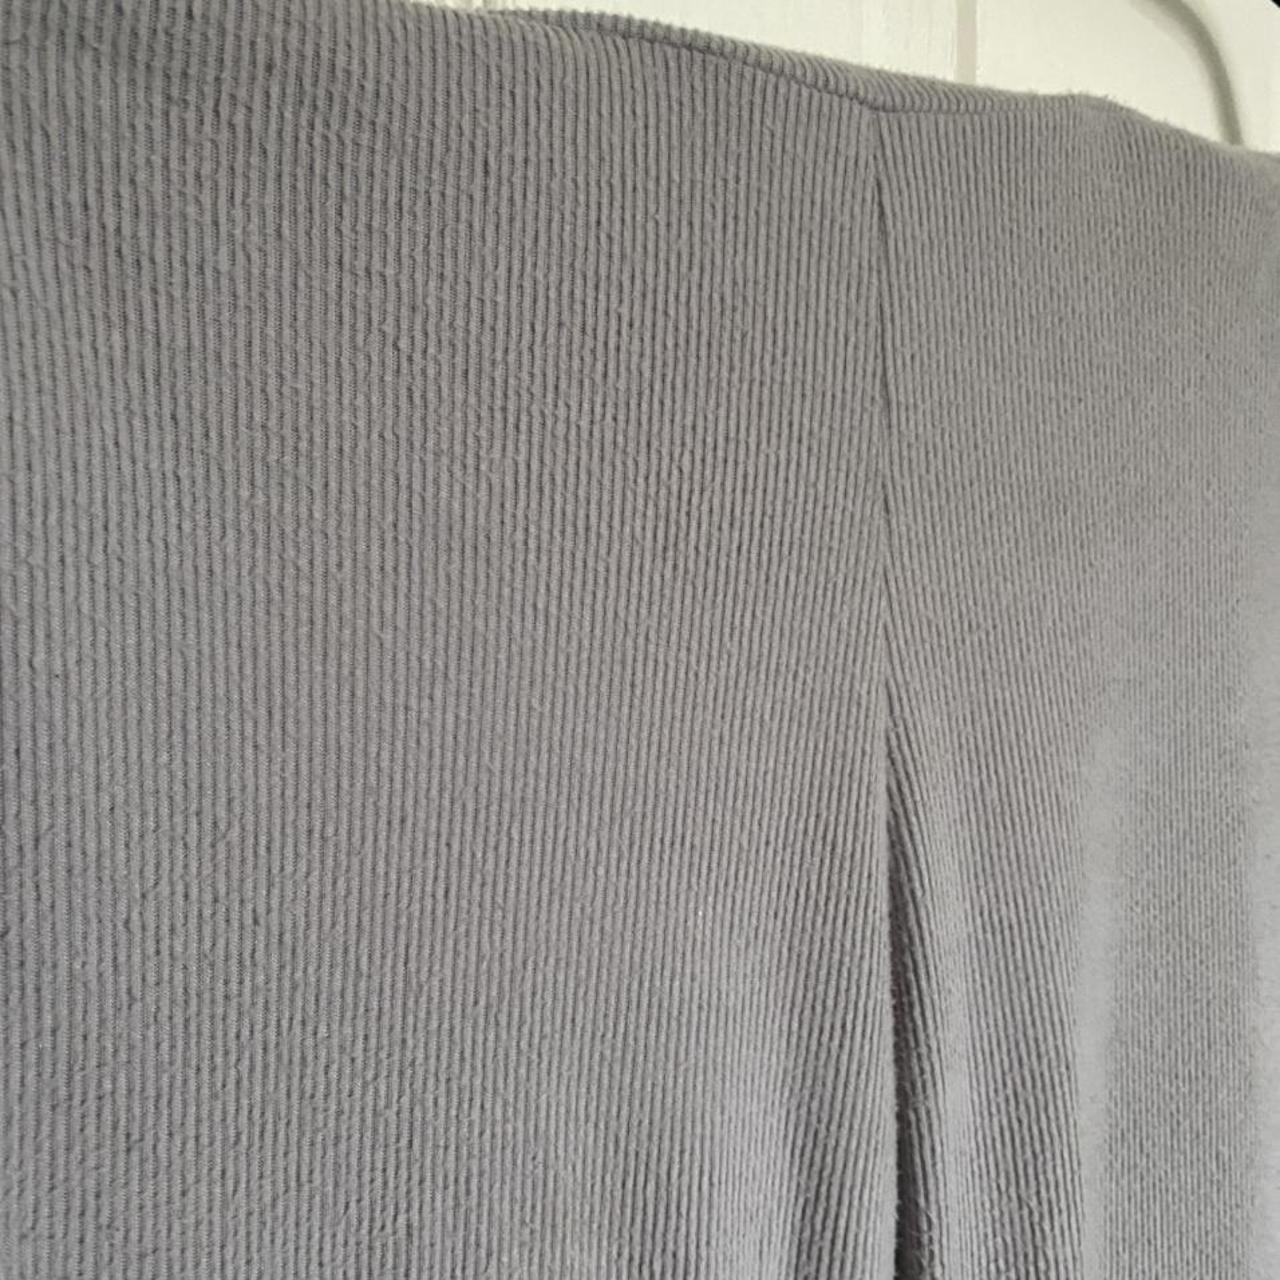 Ribbed grey PLT flares. Only worn a couple of times... - Depop